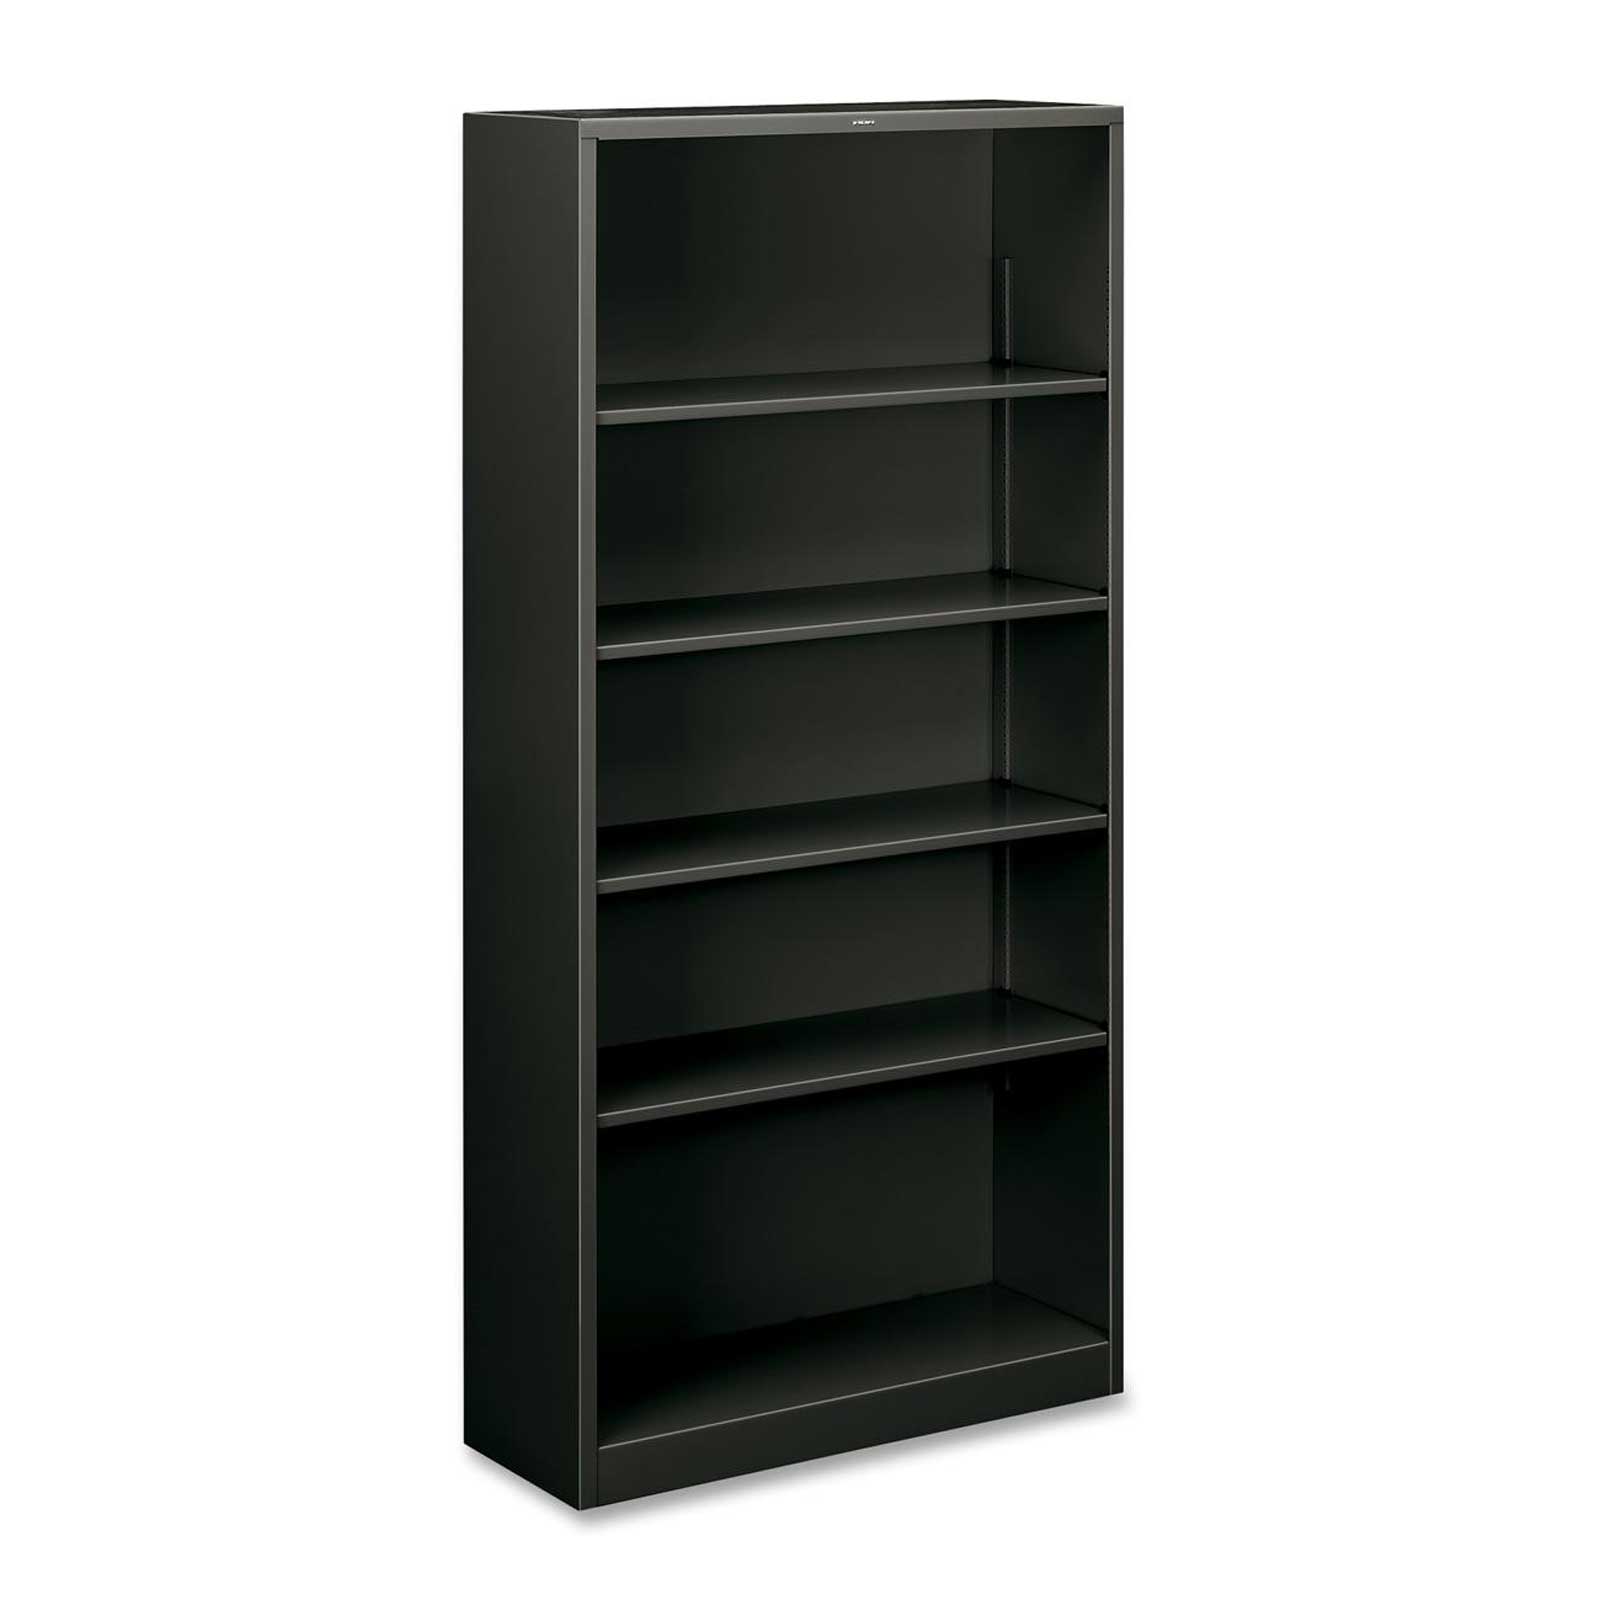 Hon Metal Bookcase To Keep The Stuffs In Order